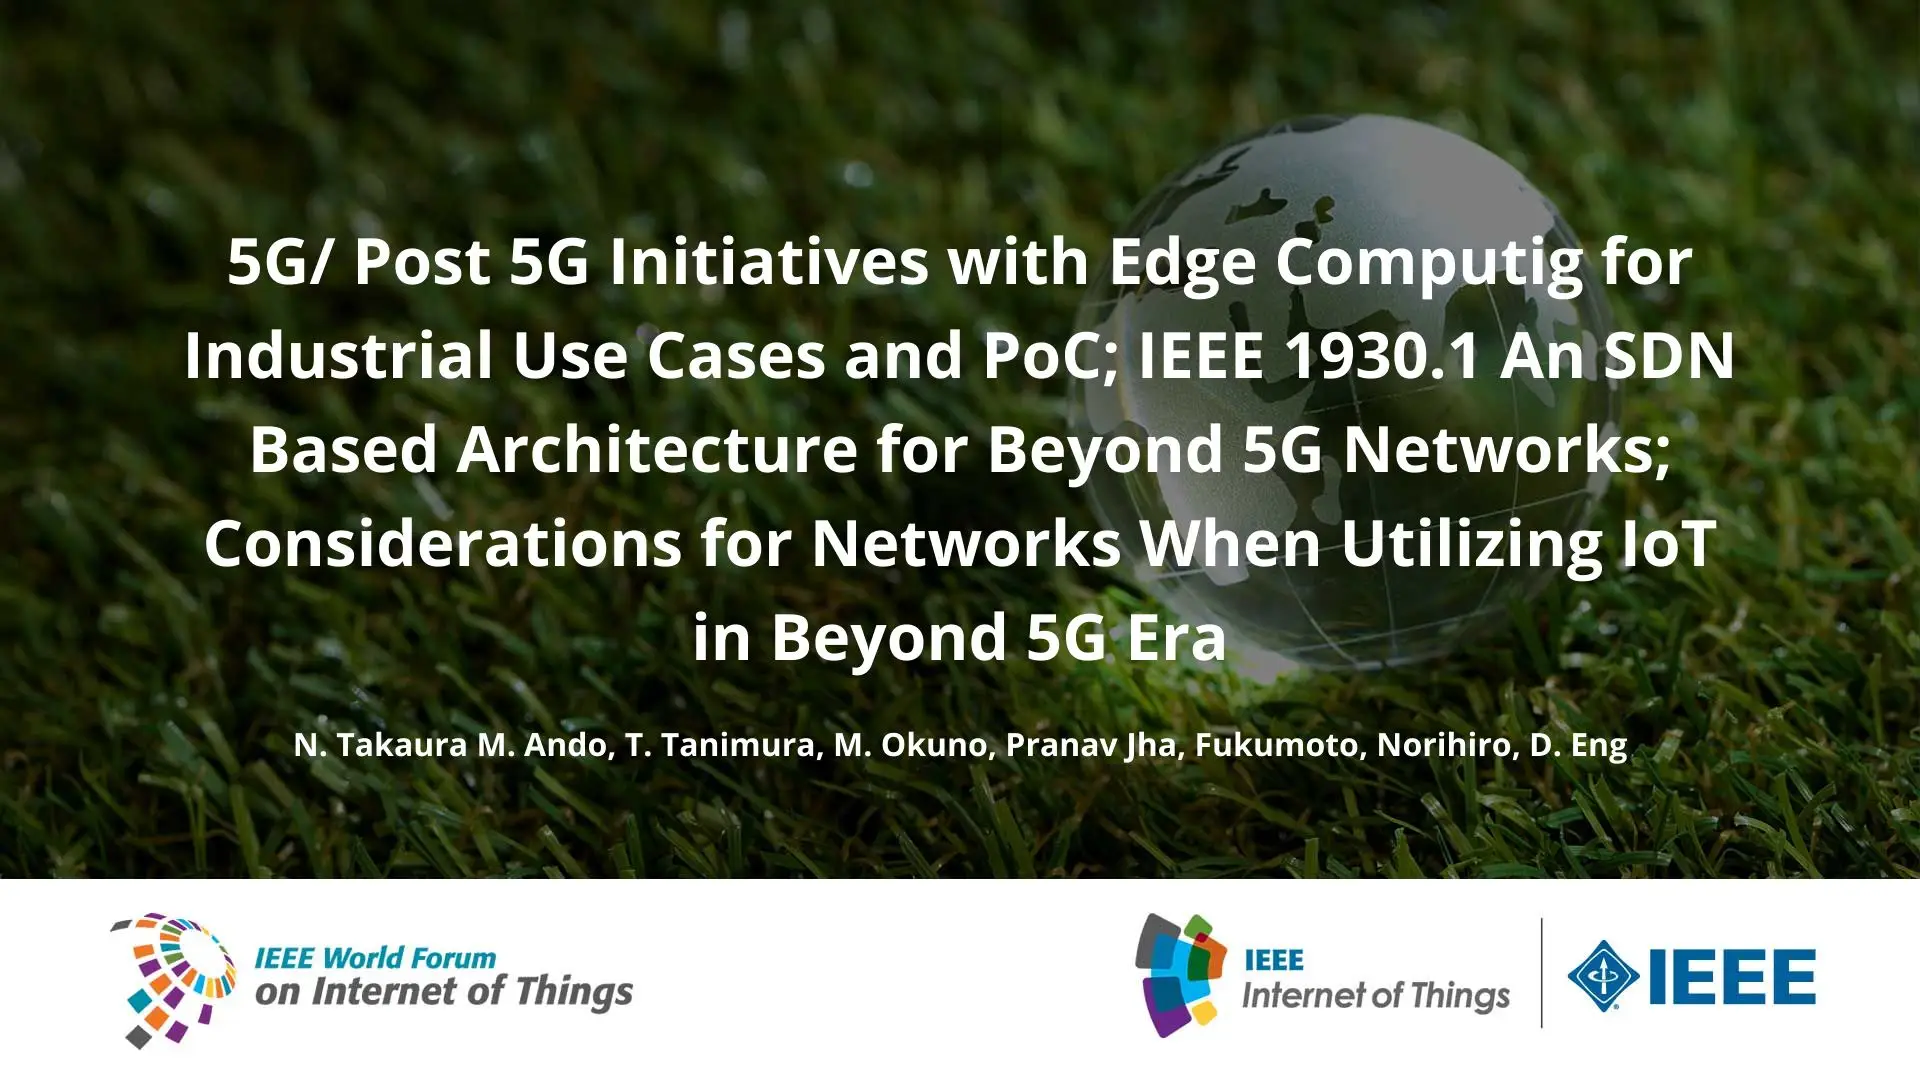 5G/ Post 5G Initiatives with Edge Computig for Industrial Use Cases and PoC; IEEE 1930.1 An SDN Based Architecture for Beyond 5G Networks; Considerations for Networks When Utilizing IoT in Beyond 5G Era